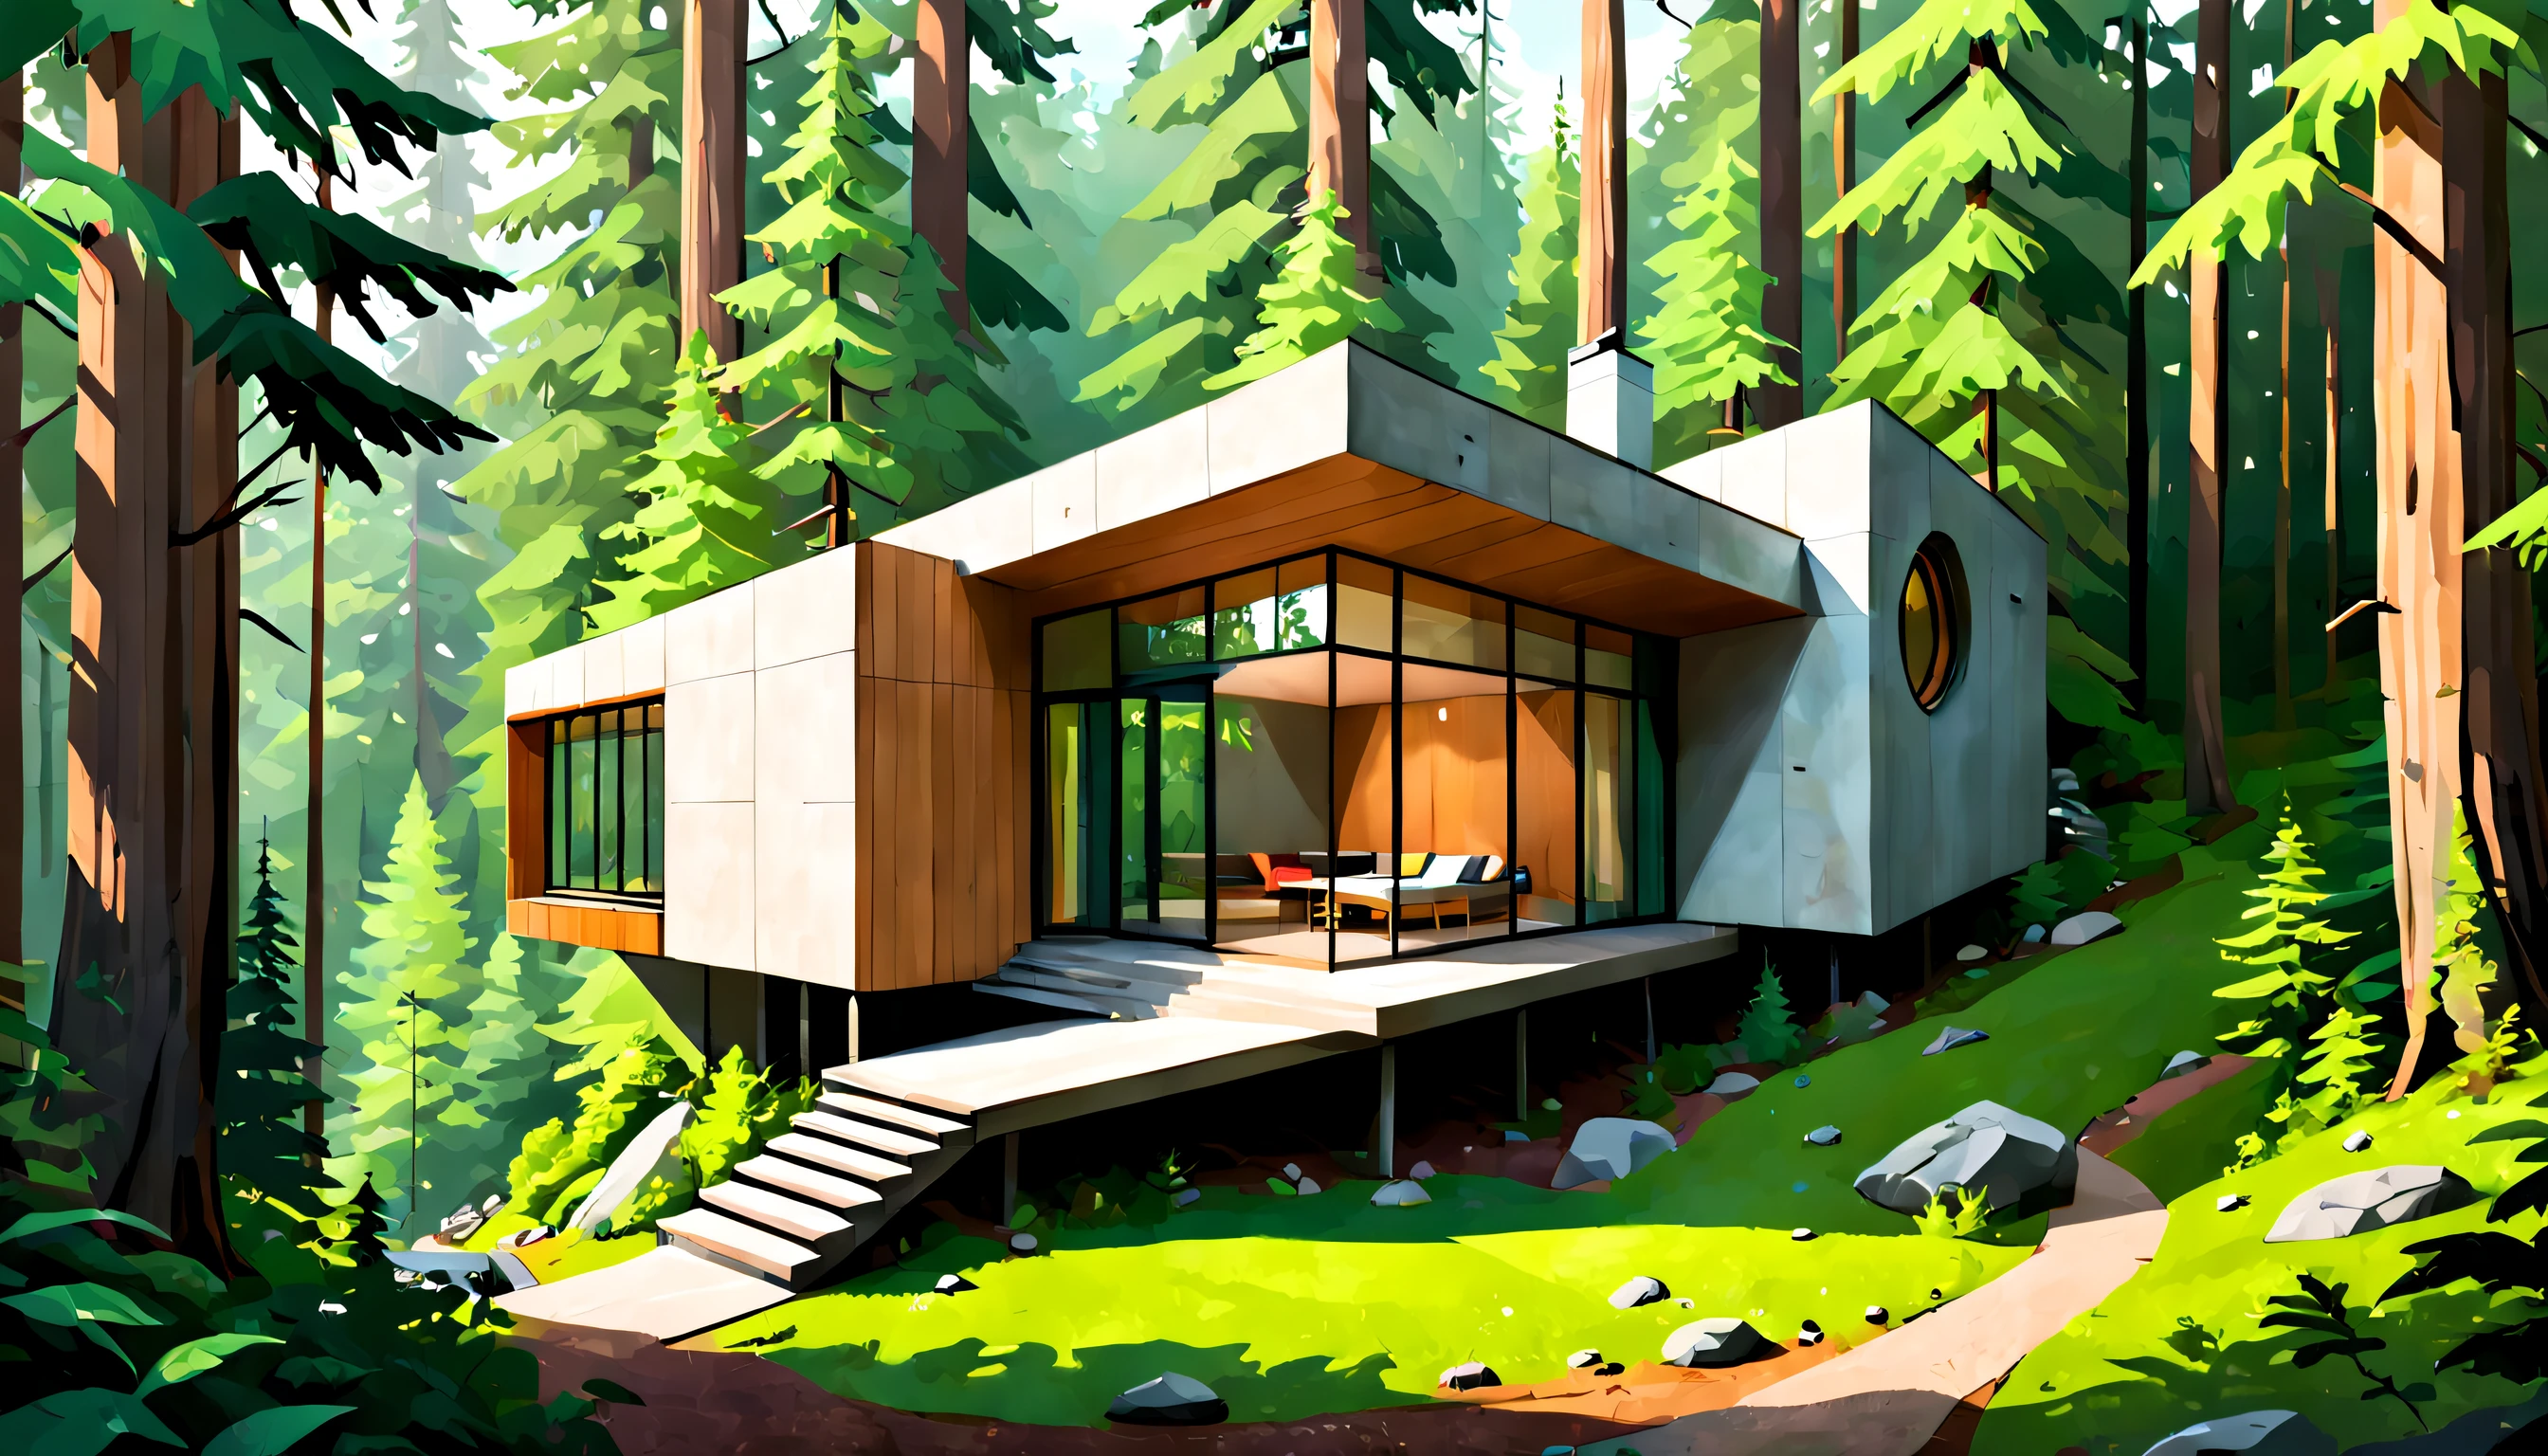 An unexpectedly modern and geometric cabin in the woods, appearing as an organic blend of nature and technology, with lush, vivid forest surroundings, capturing both the serene beauty of the environment and the daring angular architecture in an eye-catching harmony.